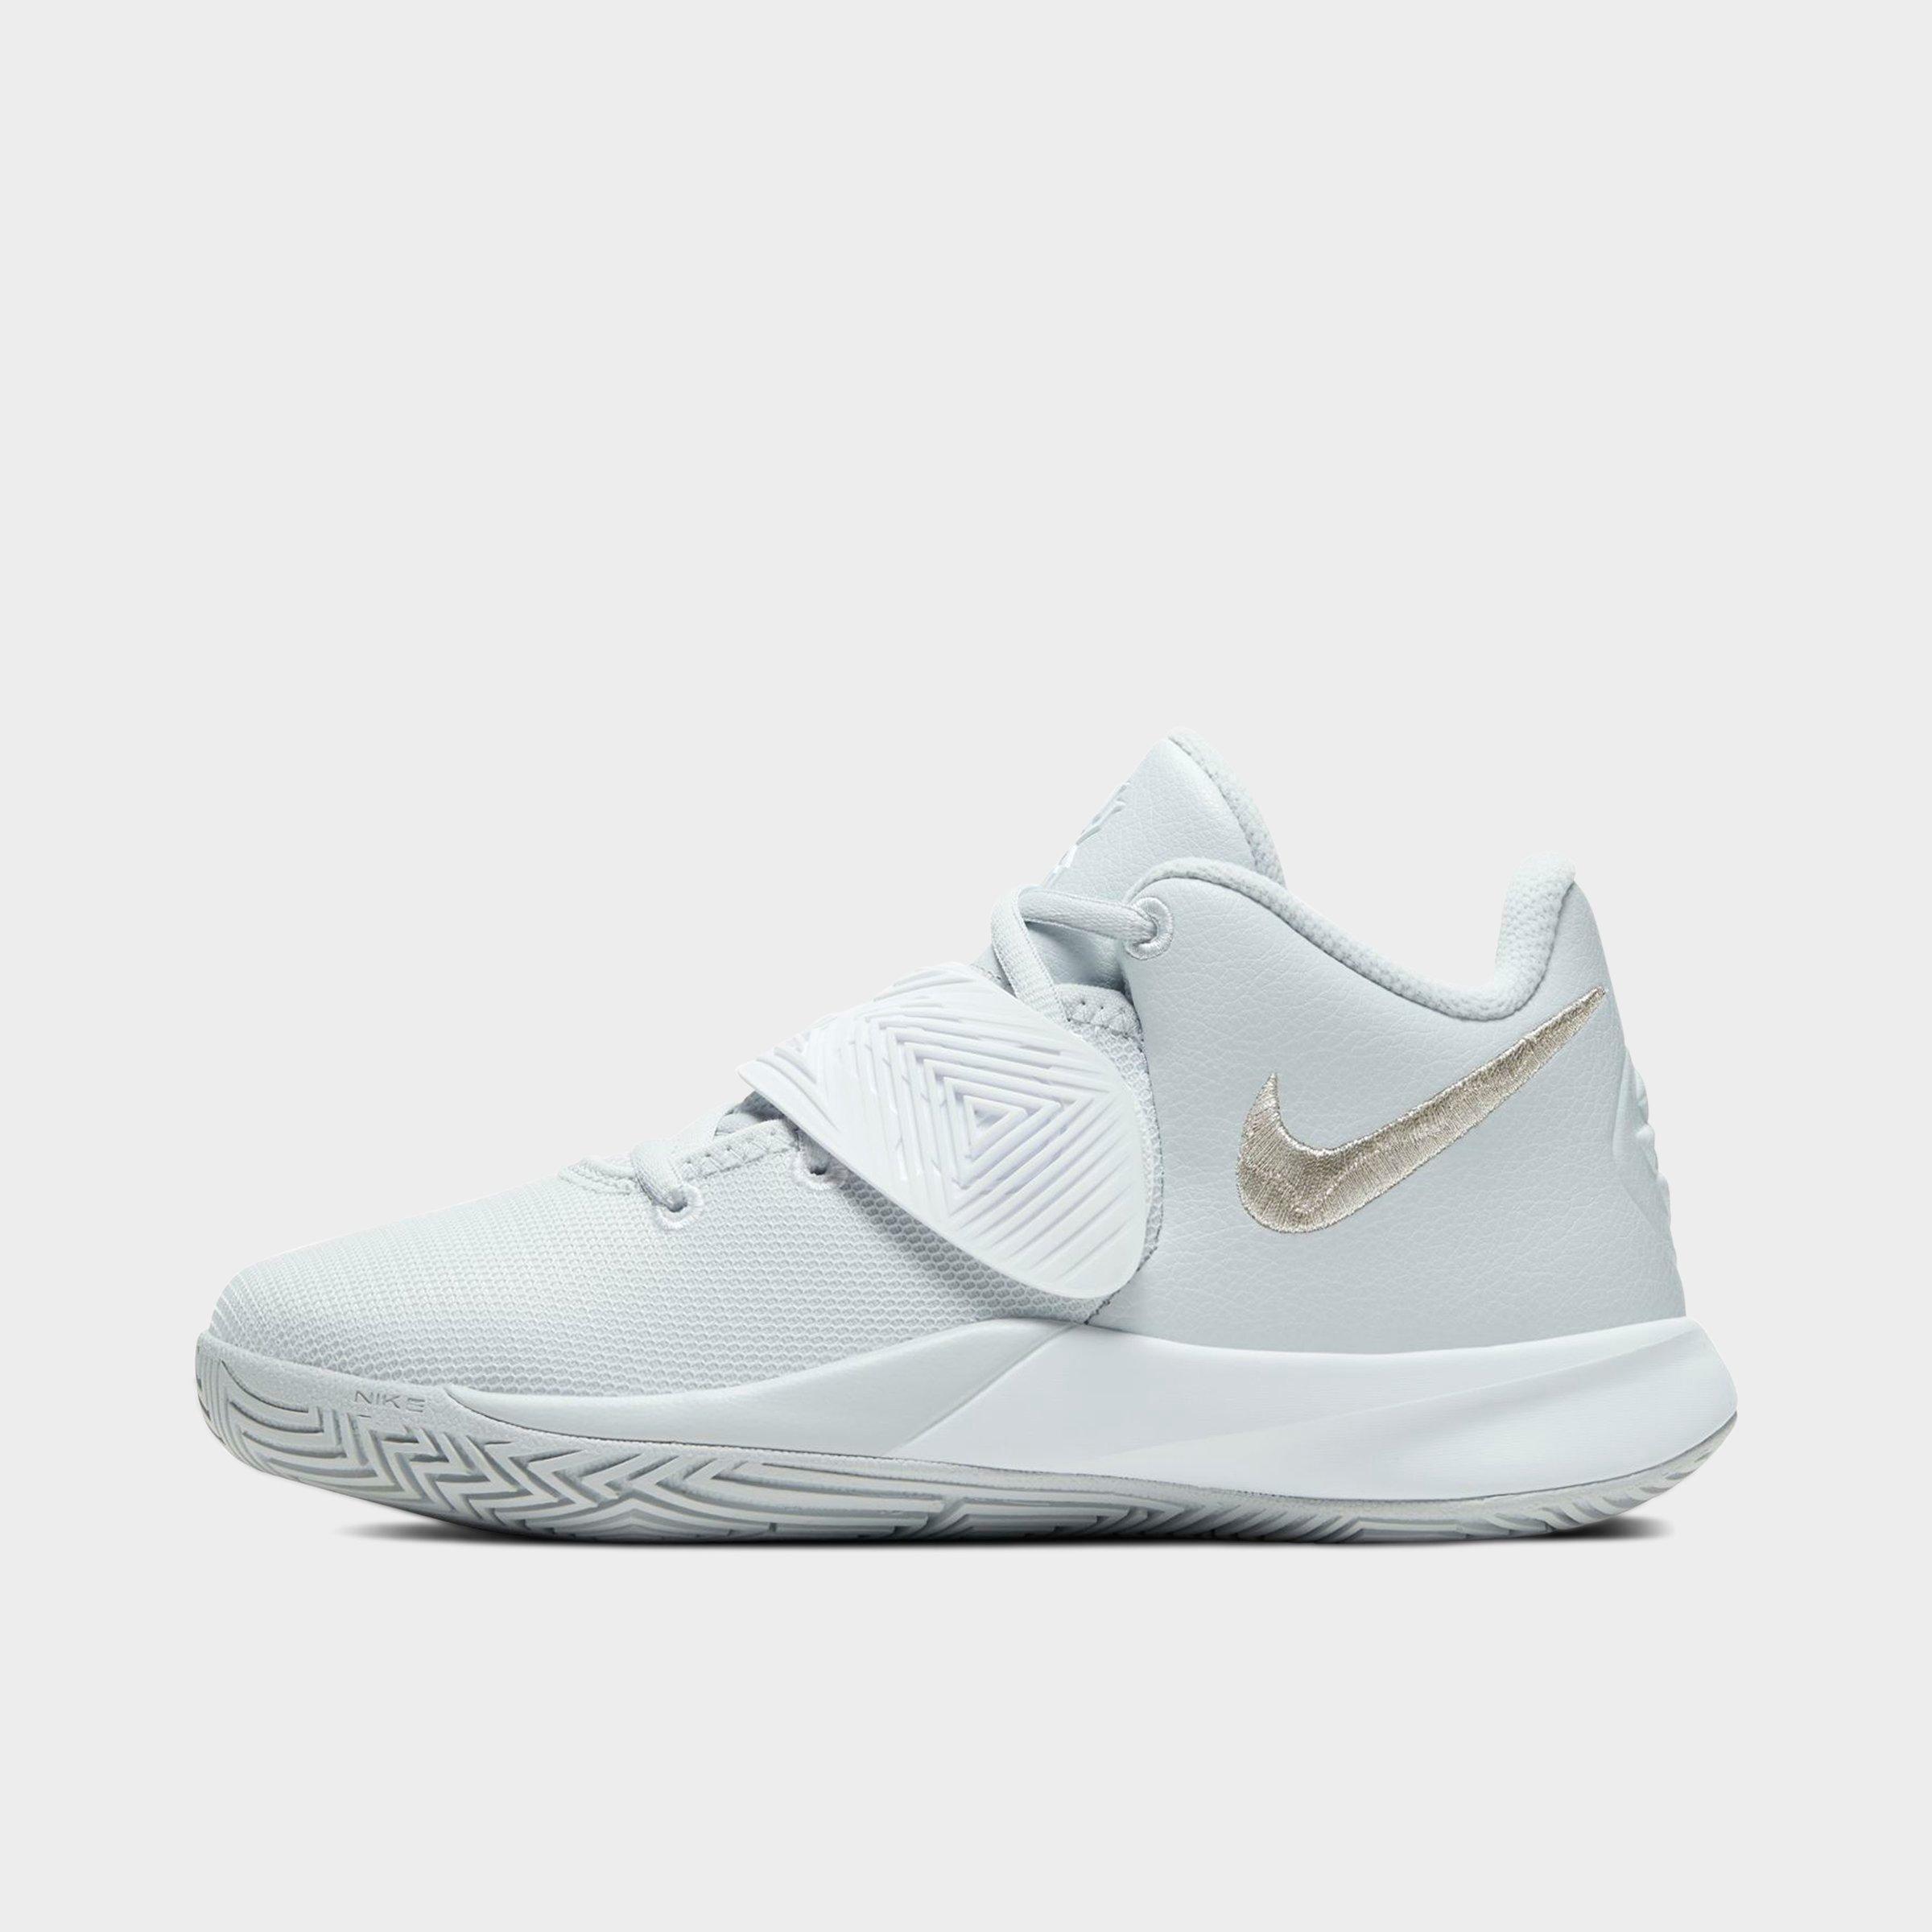 kyrie irving girls basketball shoes